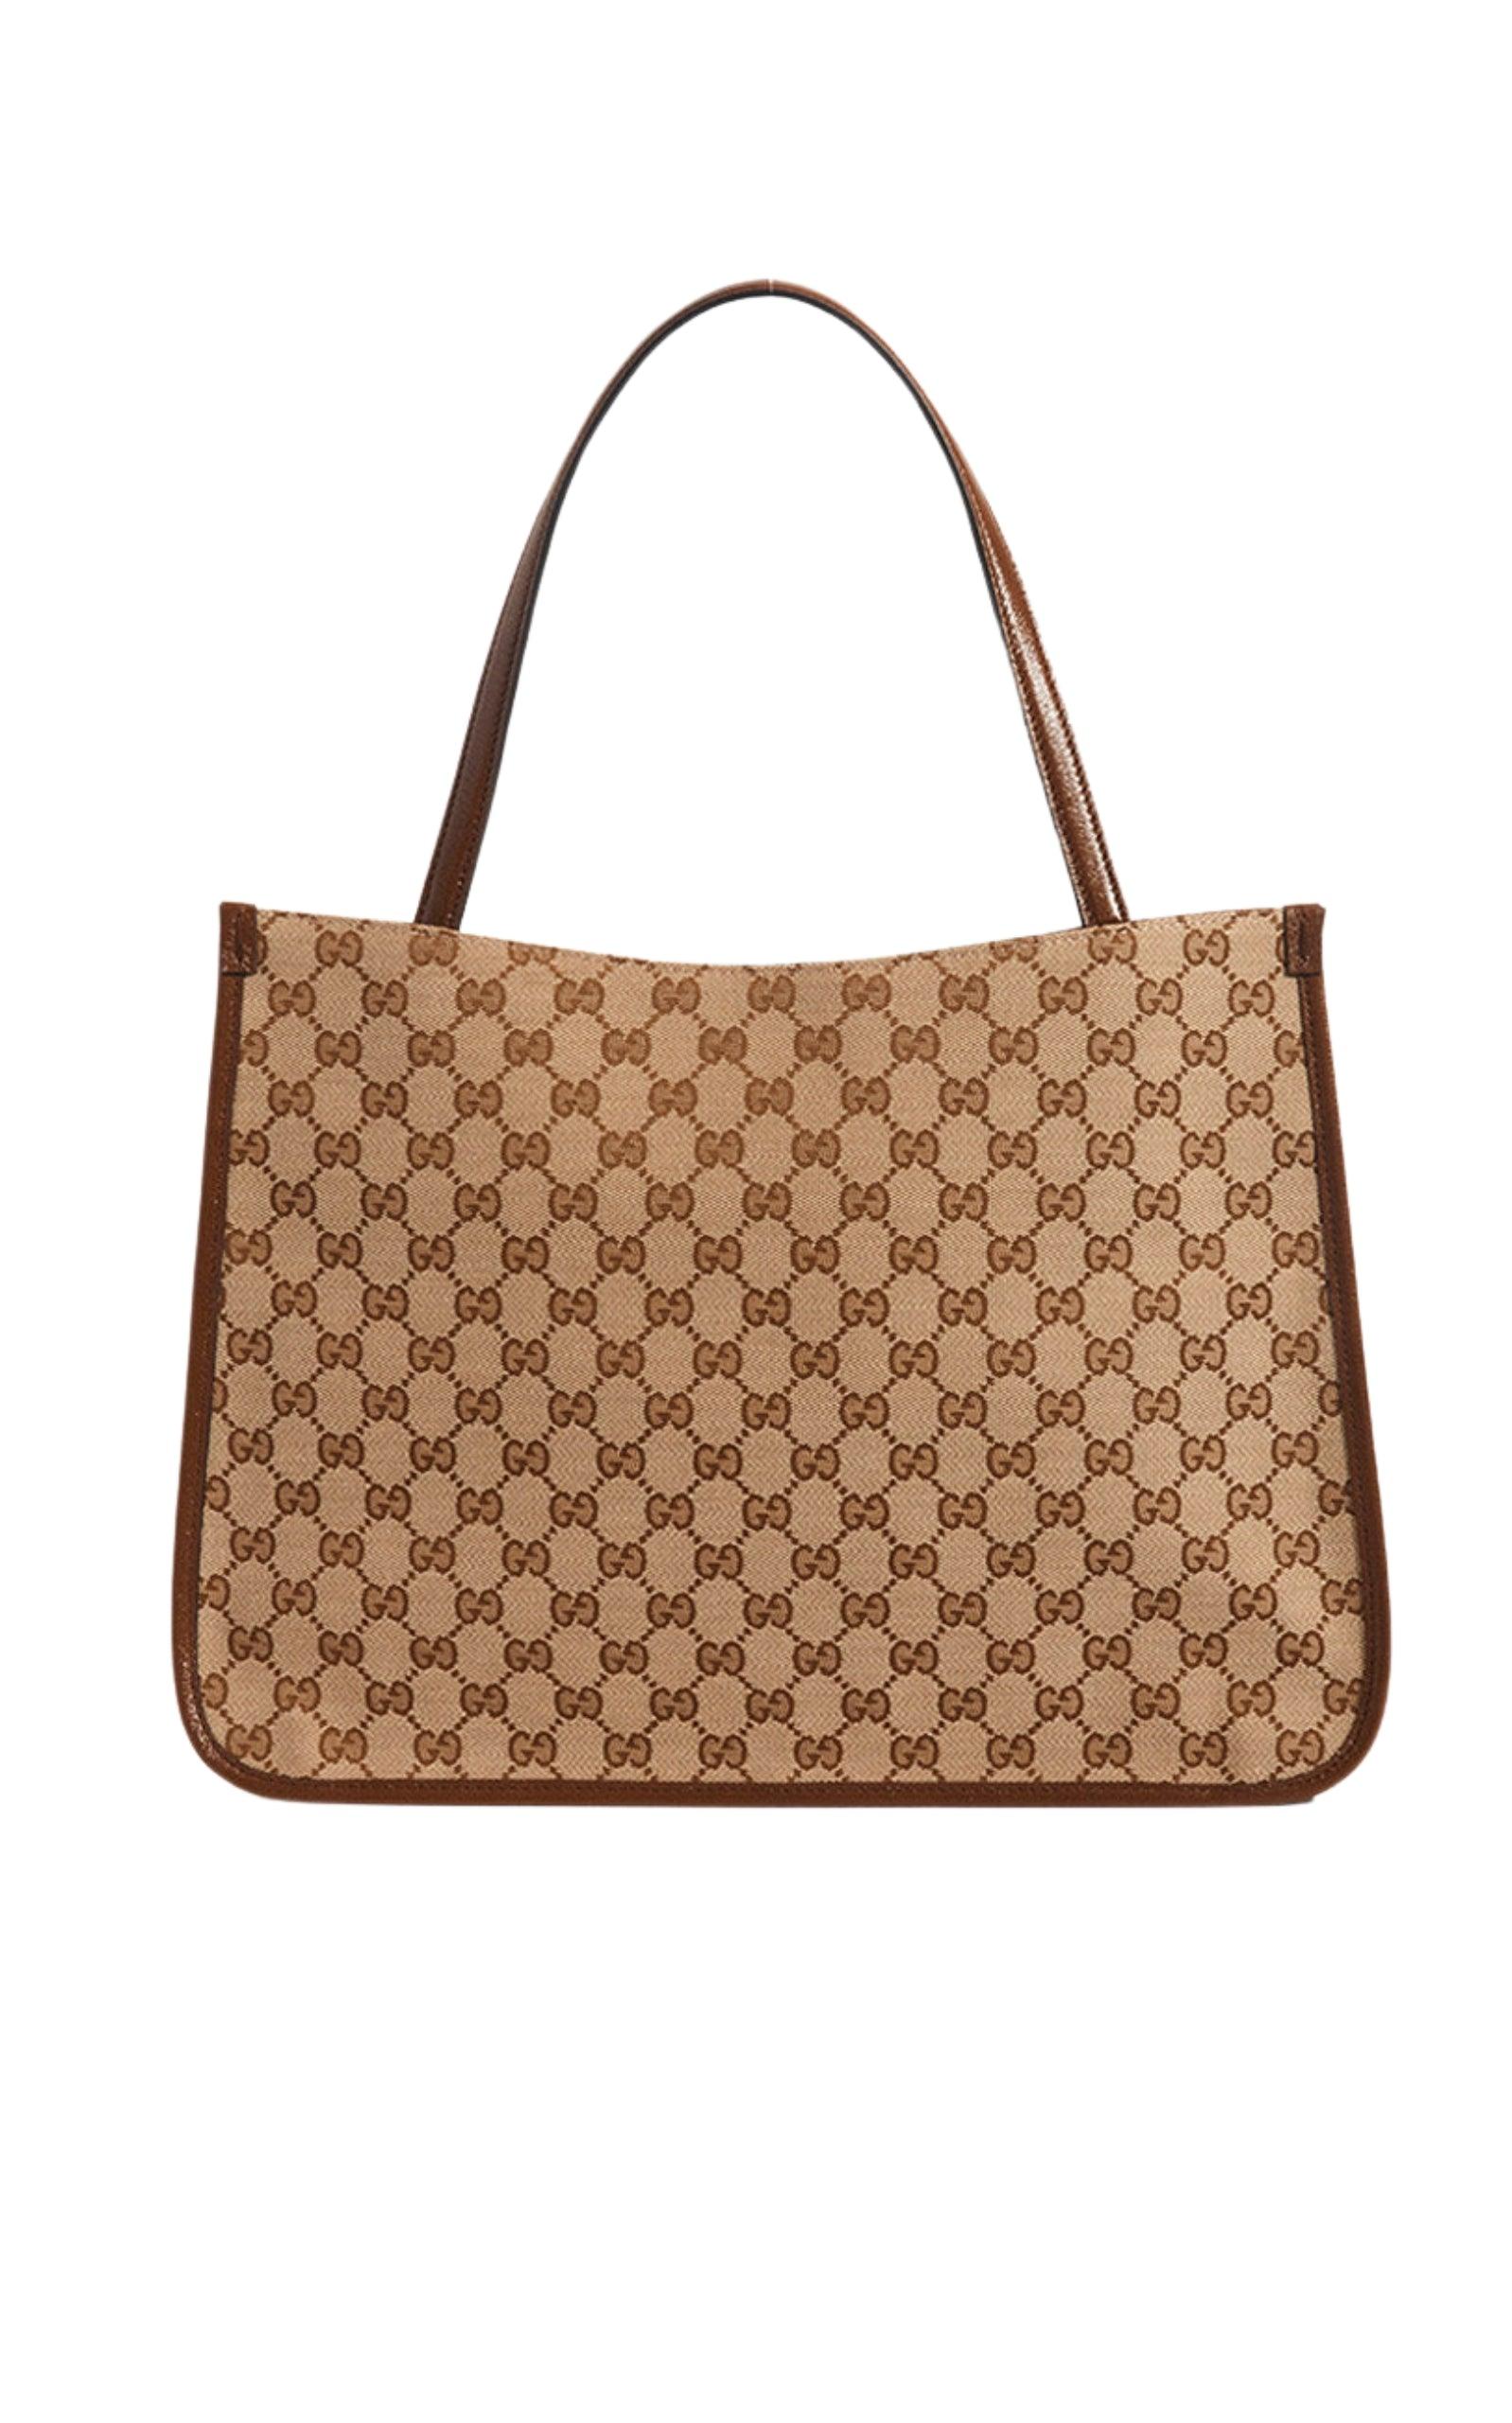 Gucci Horsebit 1955 mini rounded bag in Brown Beige GG Canvas